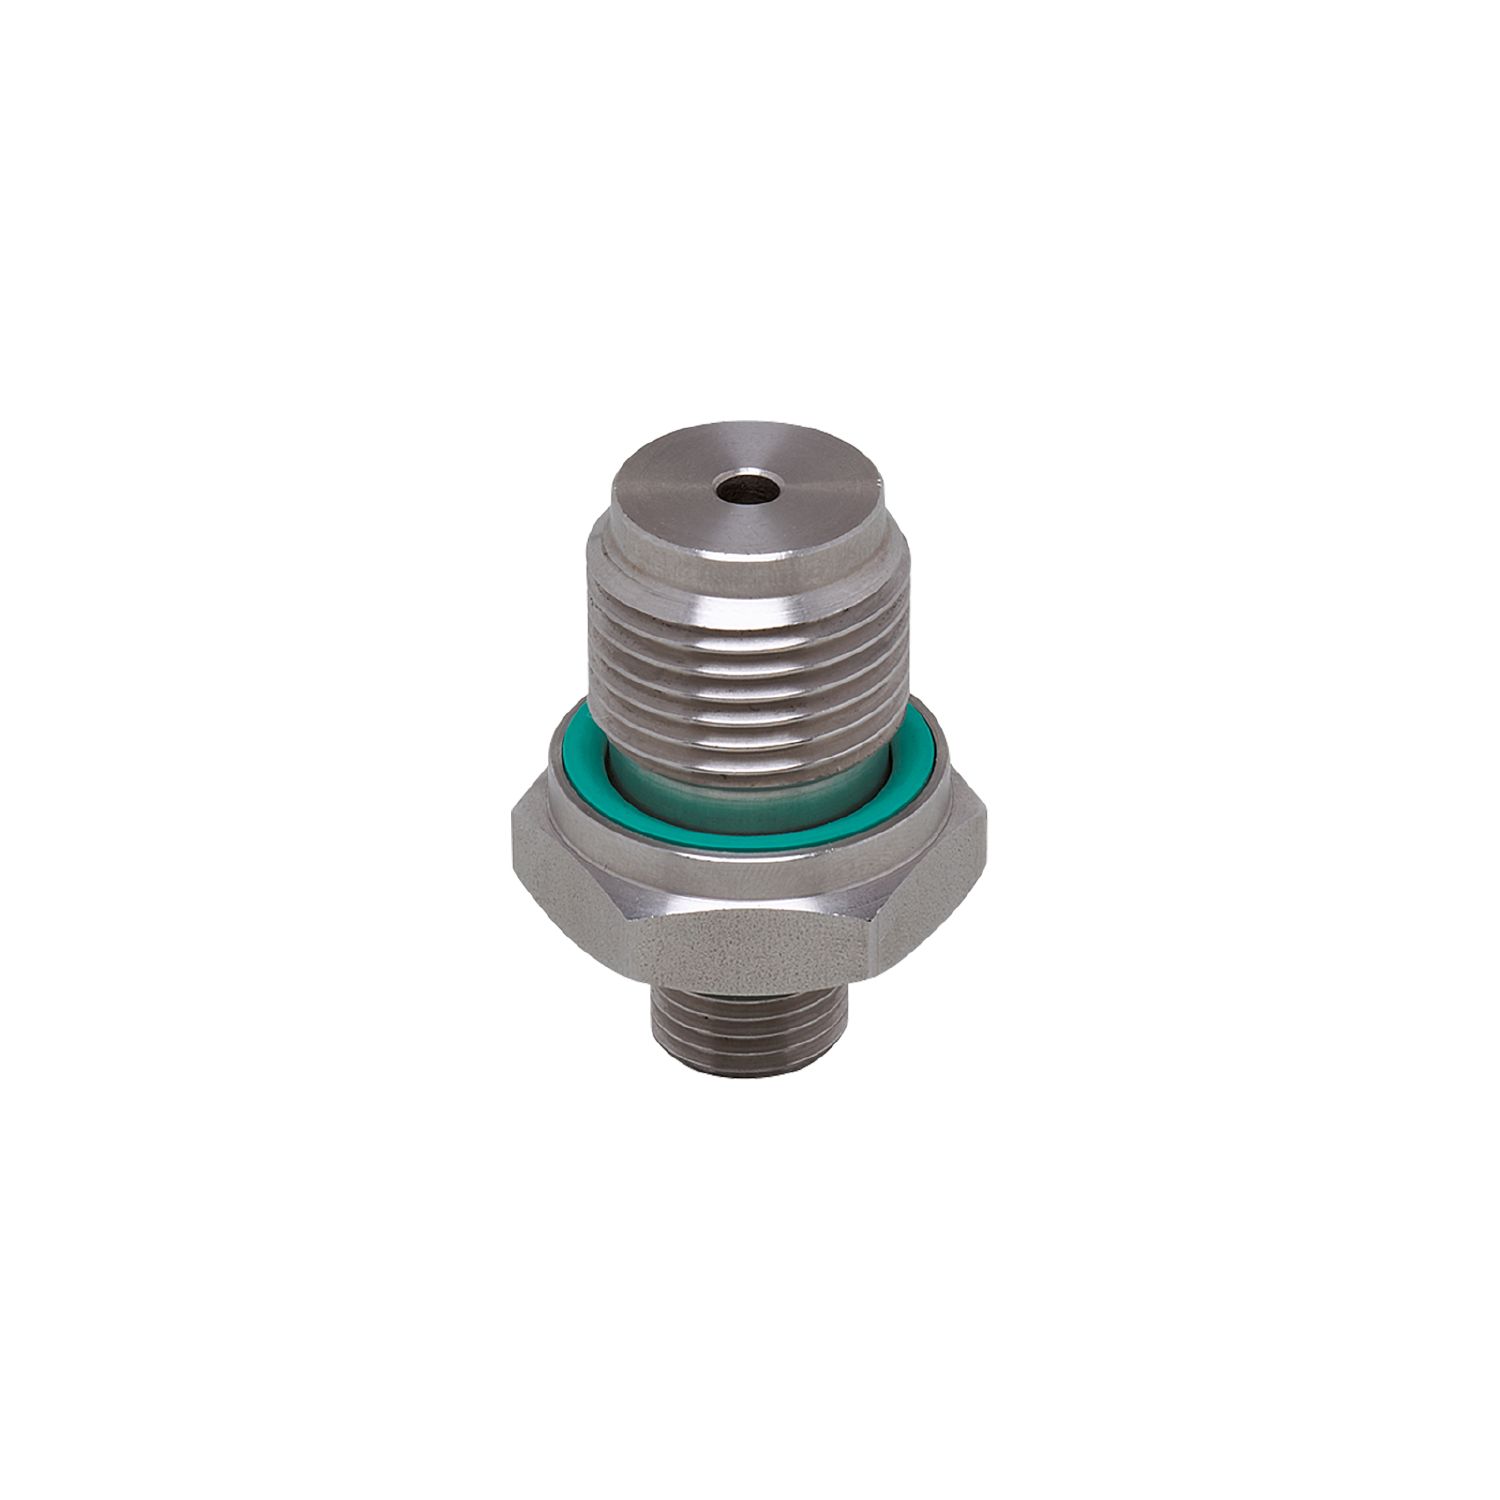 E30050 - Screw-in adapter for process sensors - ifm